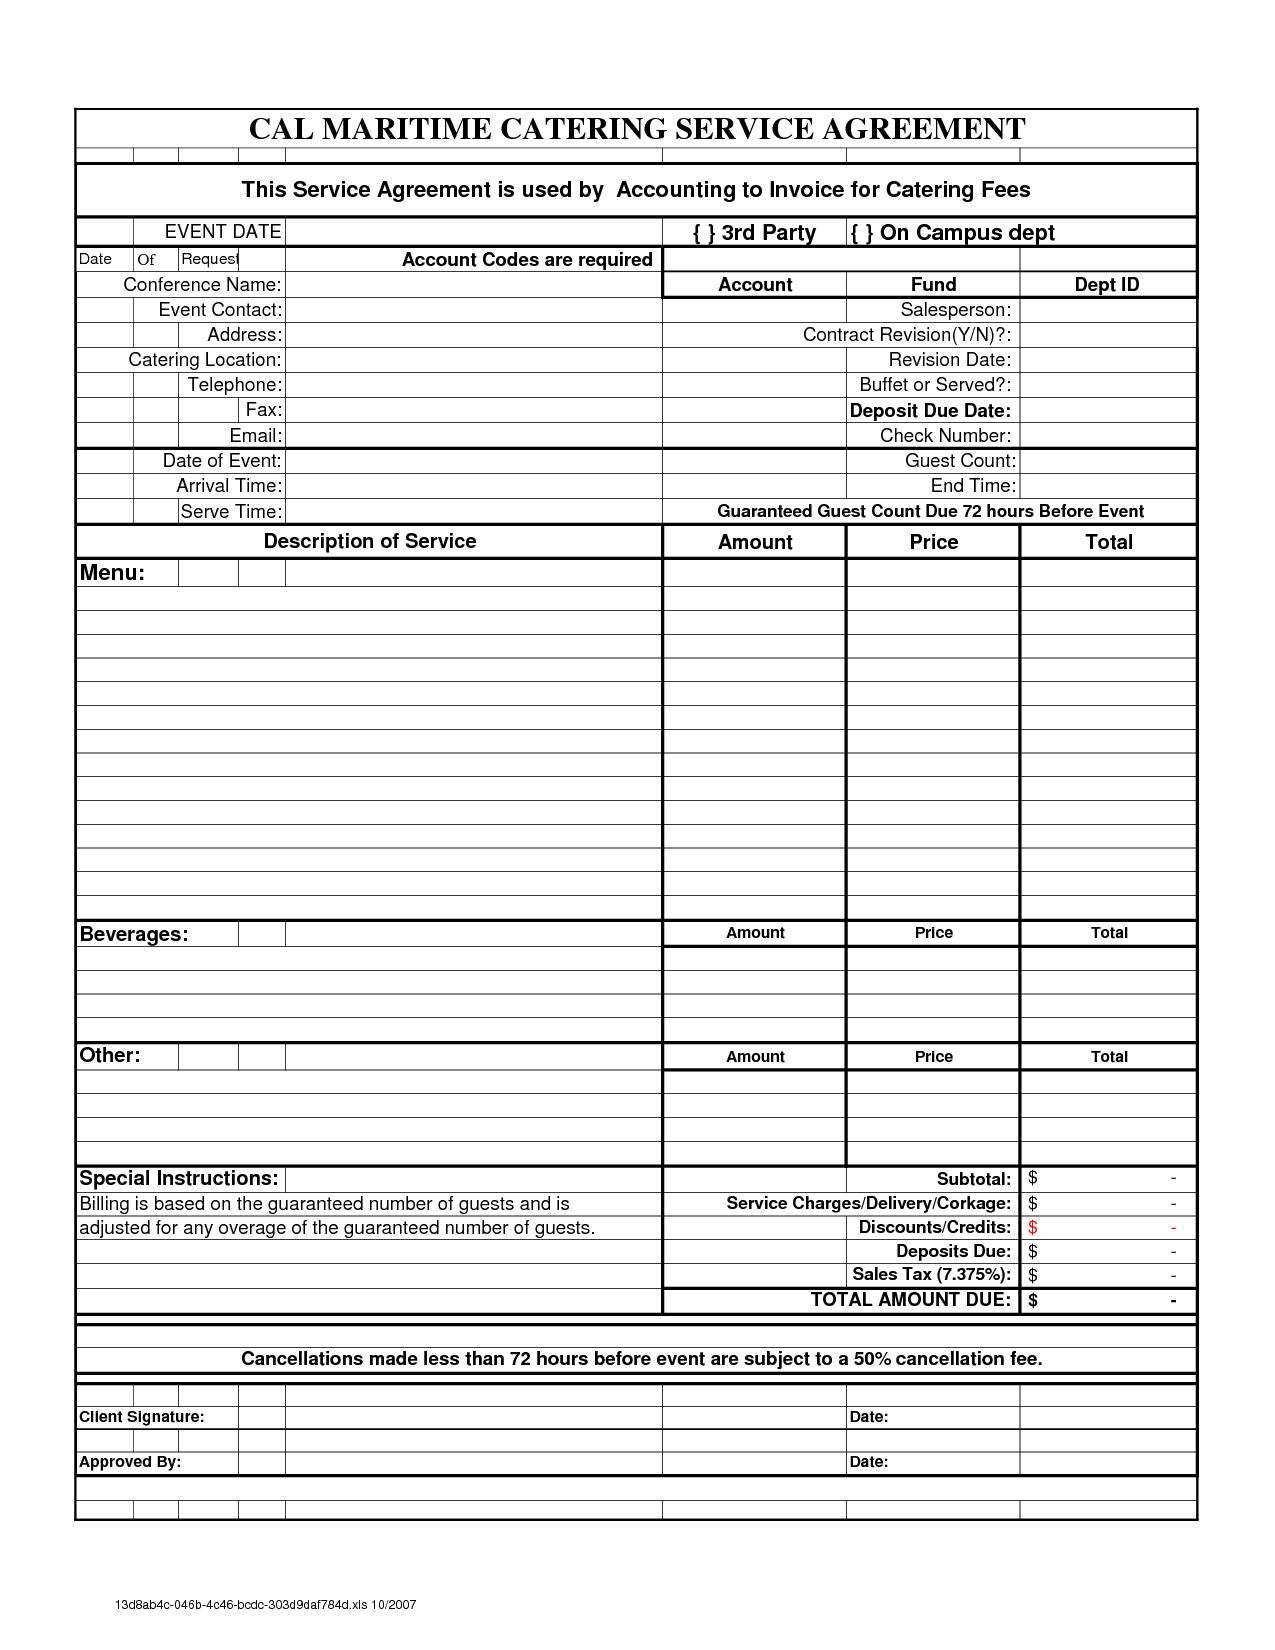 Free Downloadable Catering Contracts Forms | Catering Throughout Catering Contract Template Word